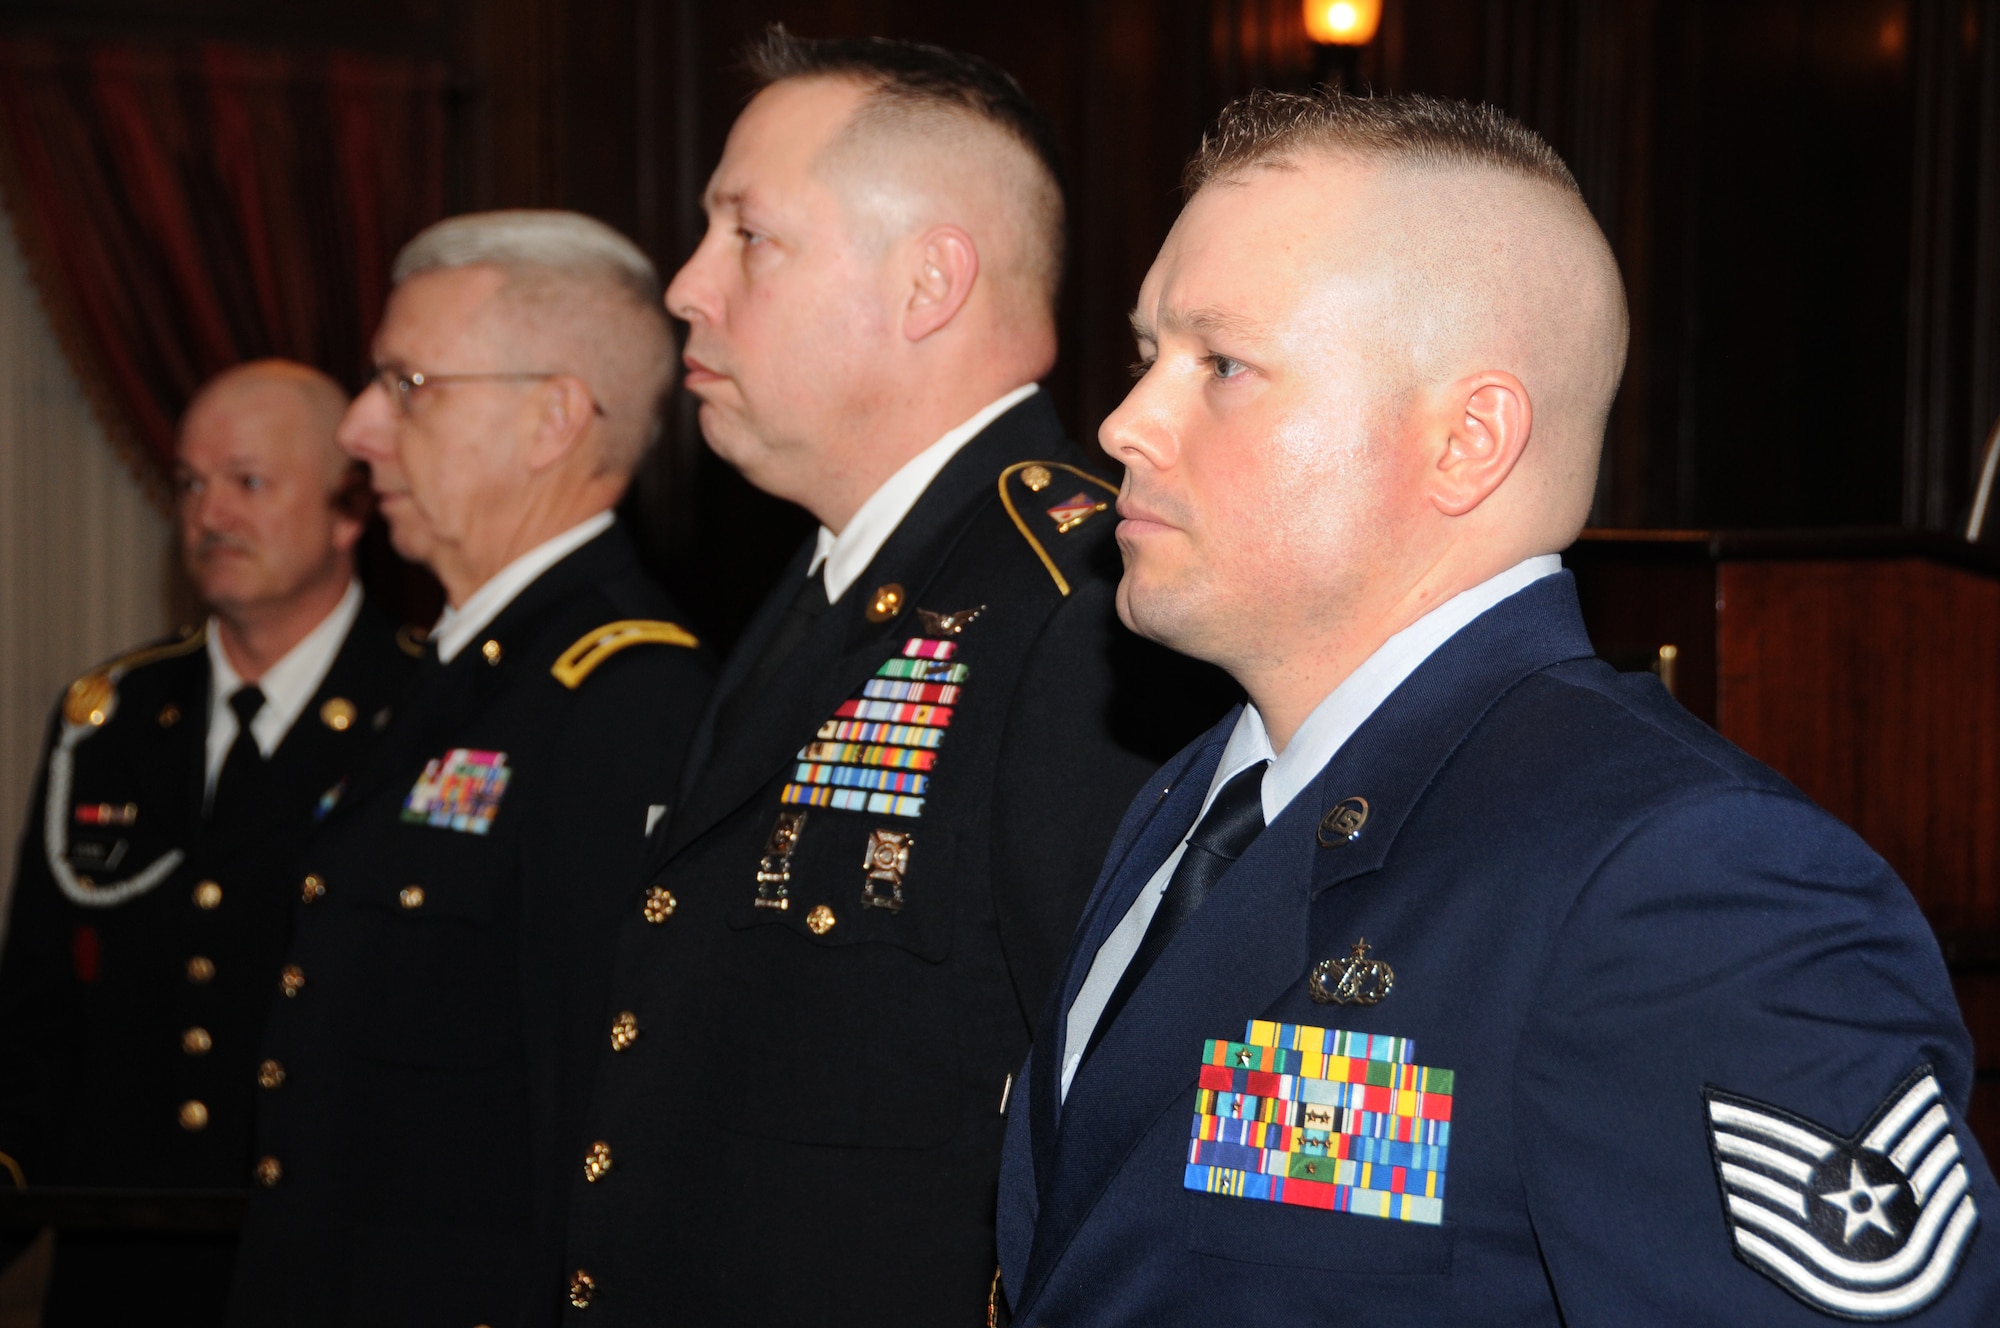 Pa. Air National Guardsmen, Tech. Sgt. Kevin Watson (right) and Pa. Army National Guardsmen, Sgt. 1st Class Bruce E. Facer, Sr. stand at attention next to Army Maj. Gen. Wesley E. Craig, adjutant general of Pa. as their citations are read for presentation of the Octavius V. Catto Medal on Feb. 23 at the Union League in Philadelphia. The award recognizes Pa. National Guard member’s contributions toward citizenship, volunteerism and commitment to duty.